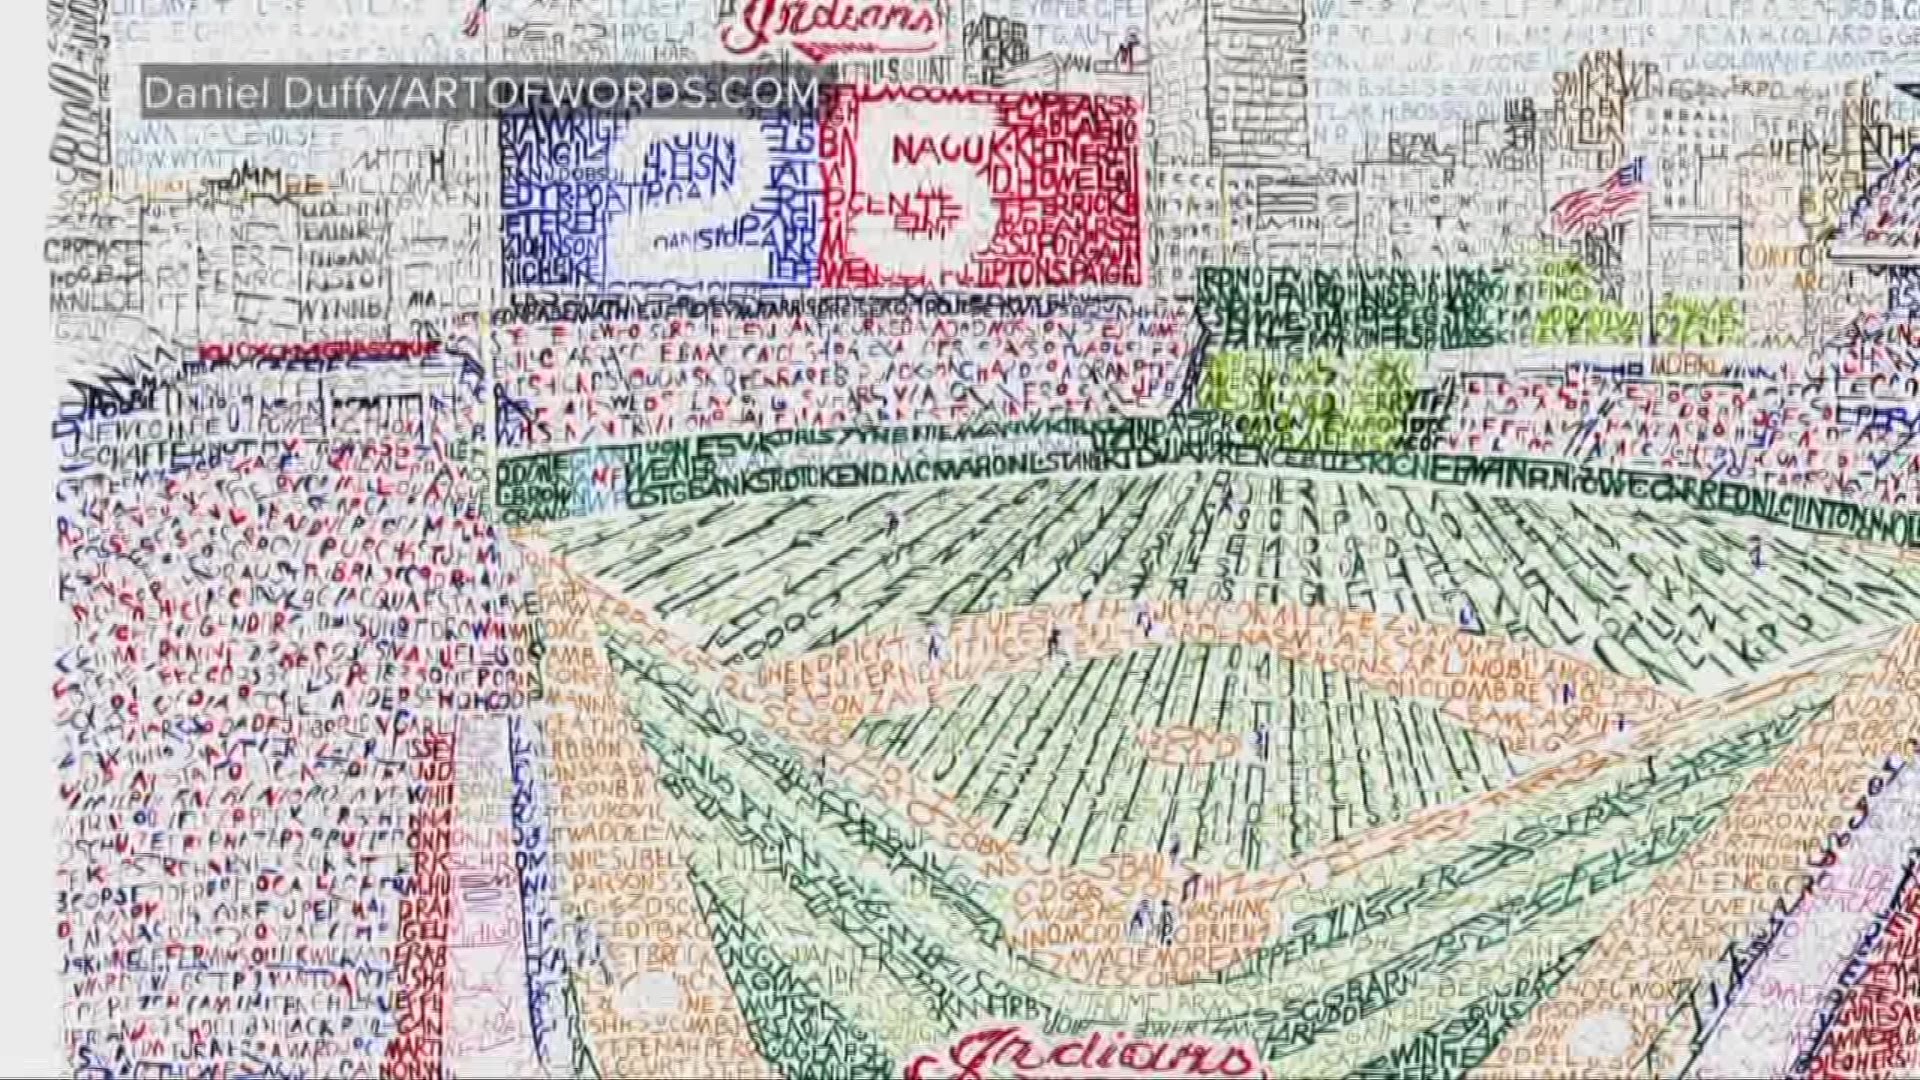 Artist creates portrait of Progressive Field with names of every player in Cleveland Indians history